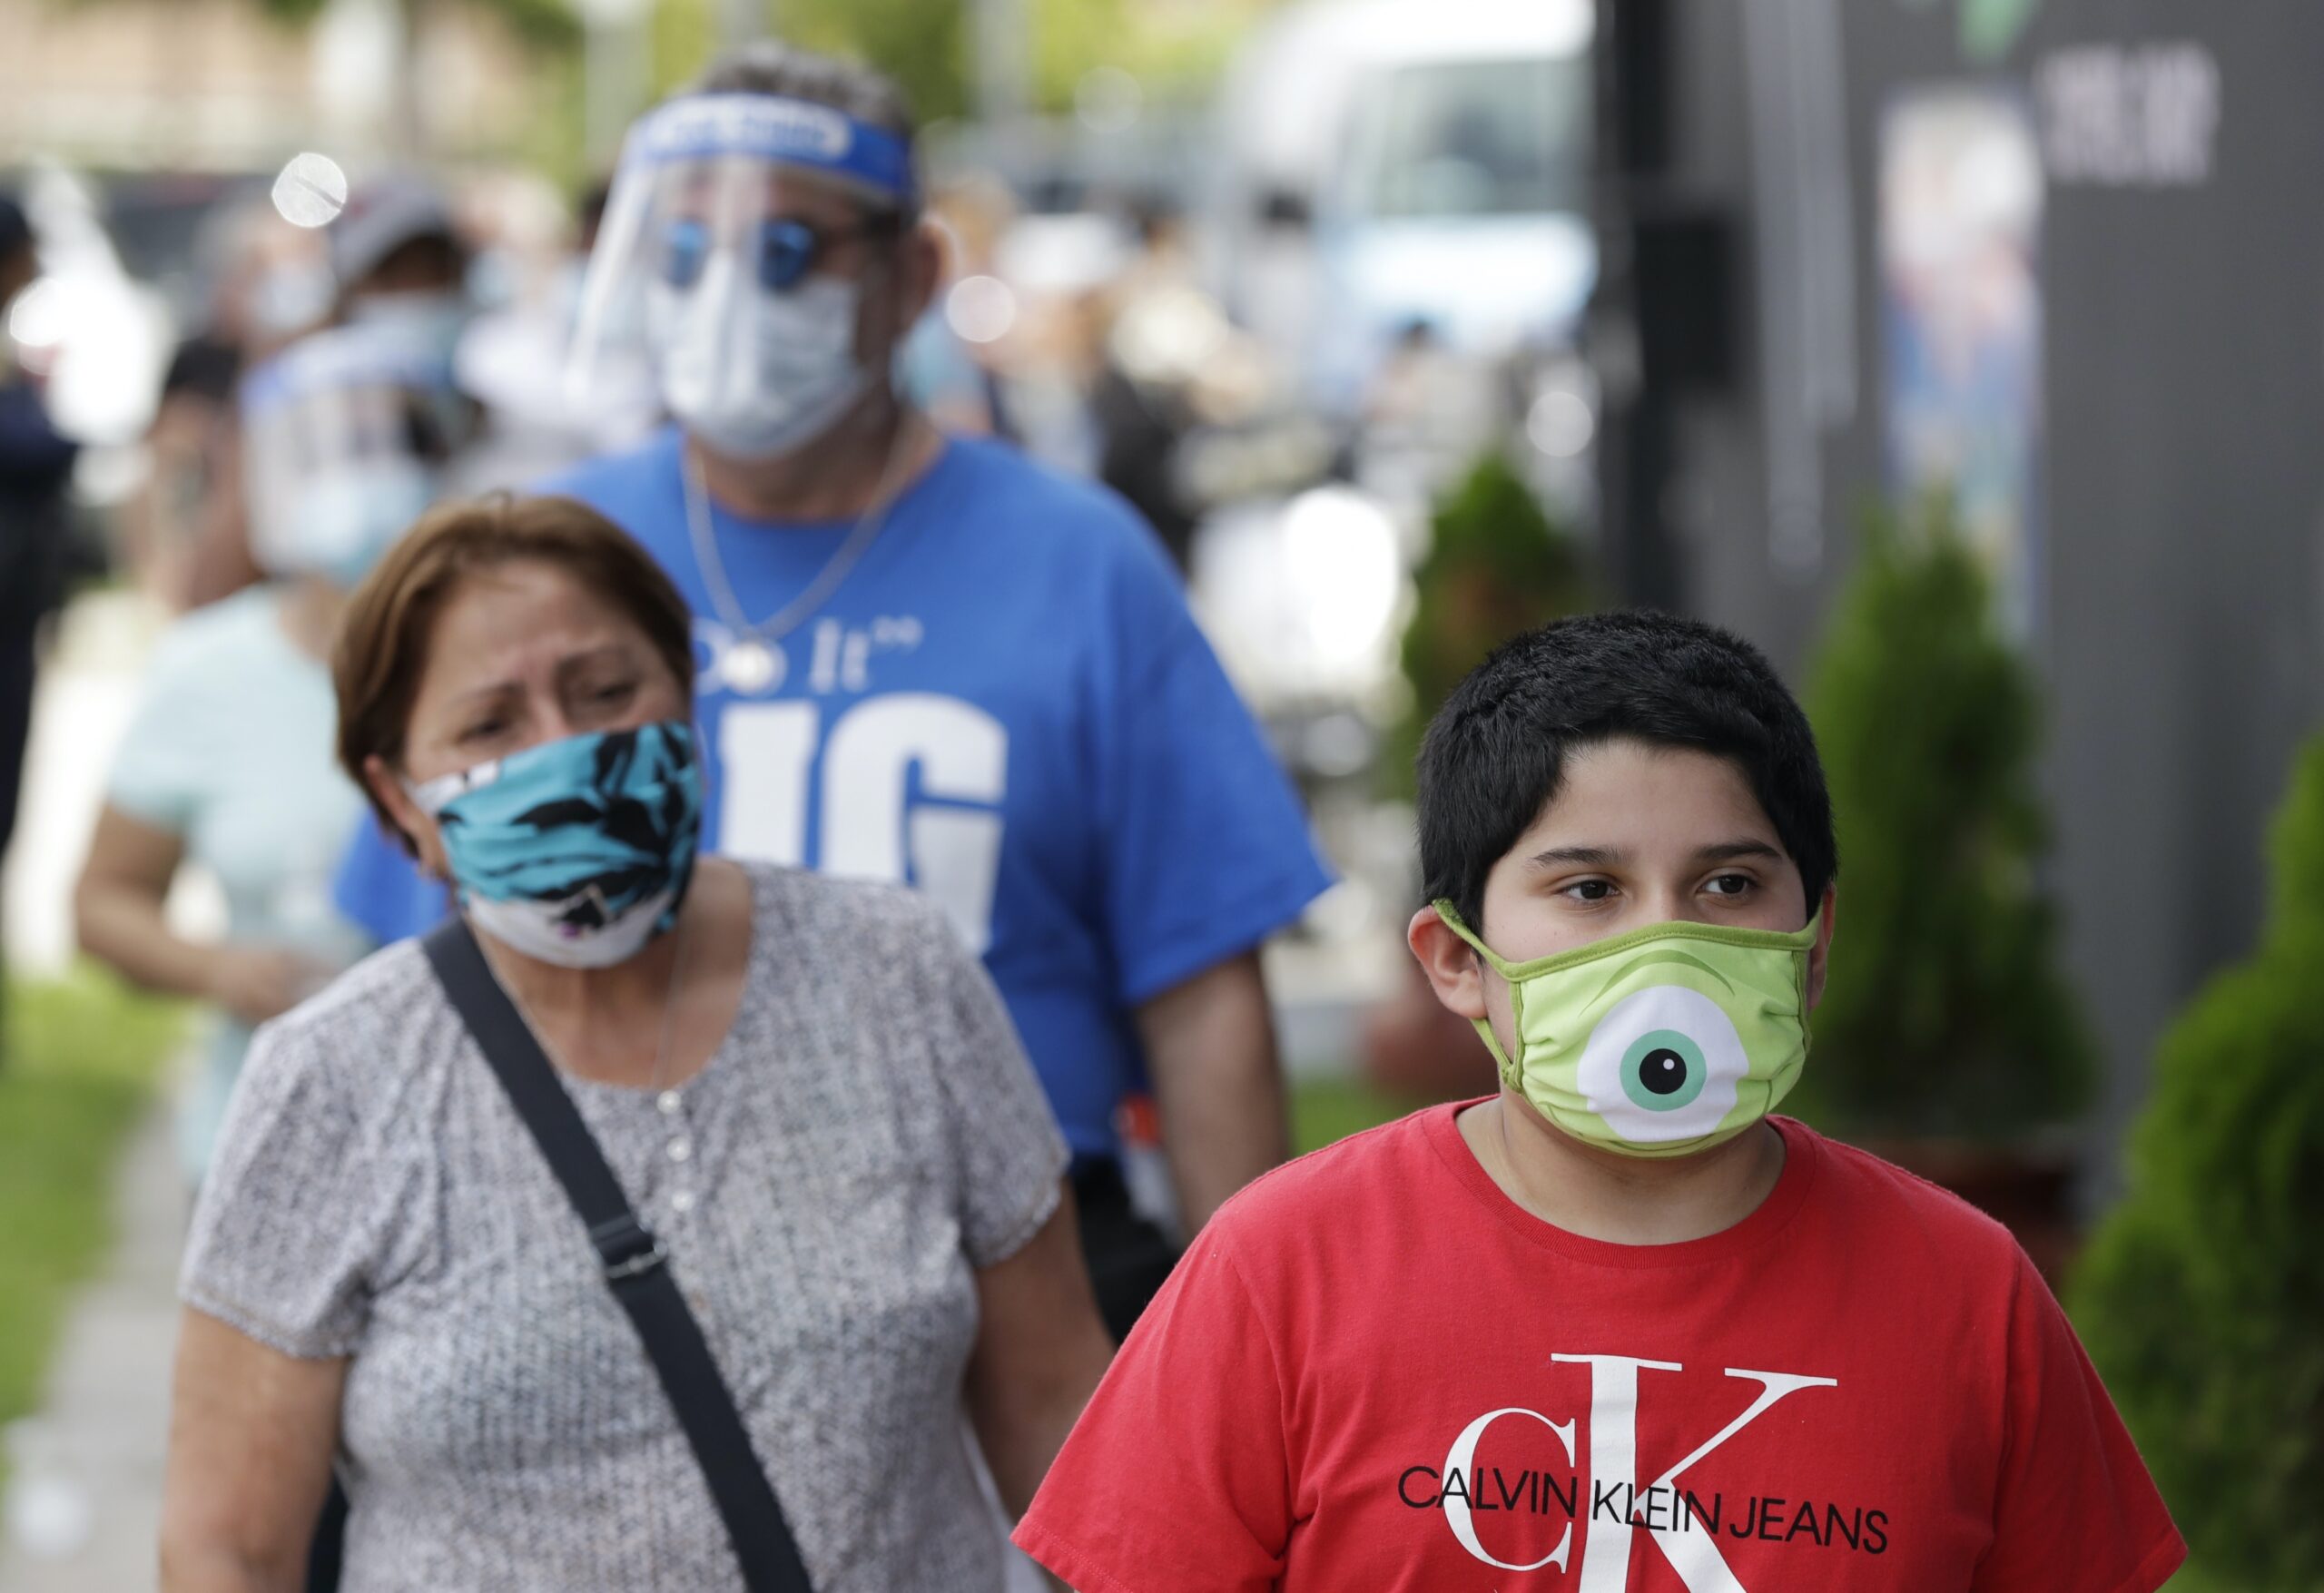 People waiting in line wearing masks